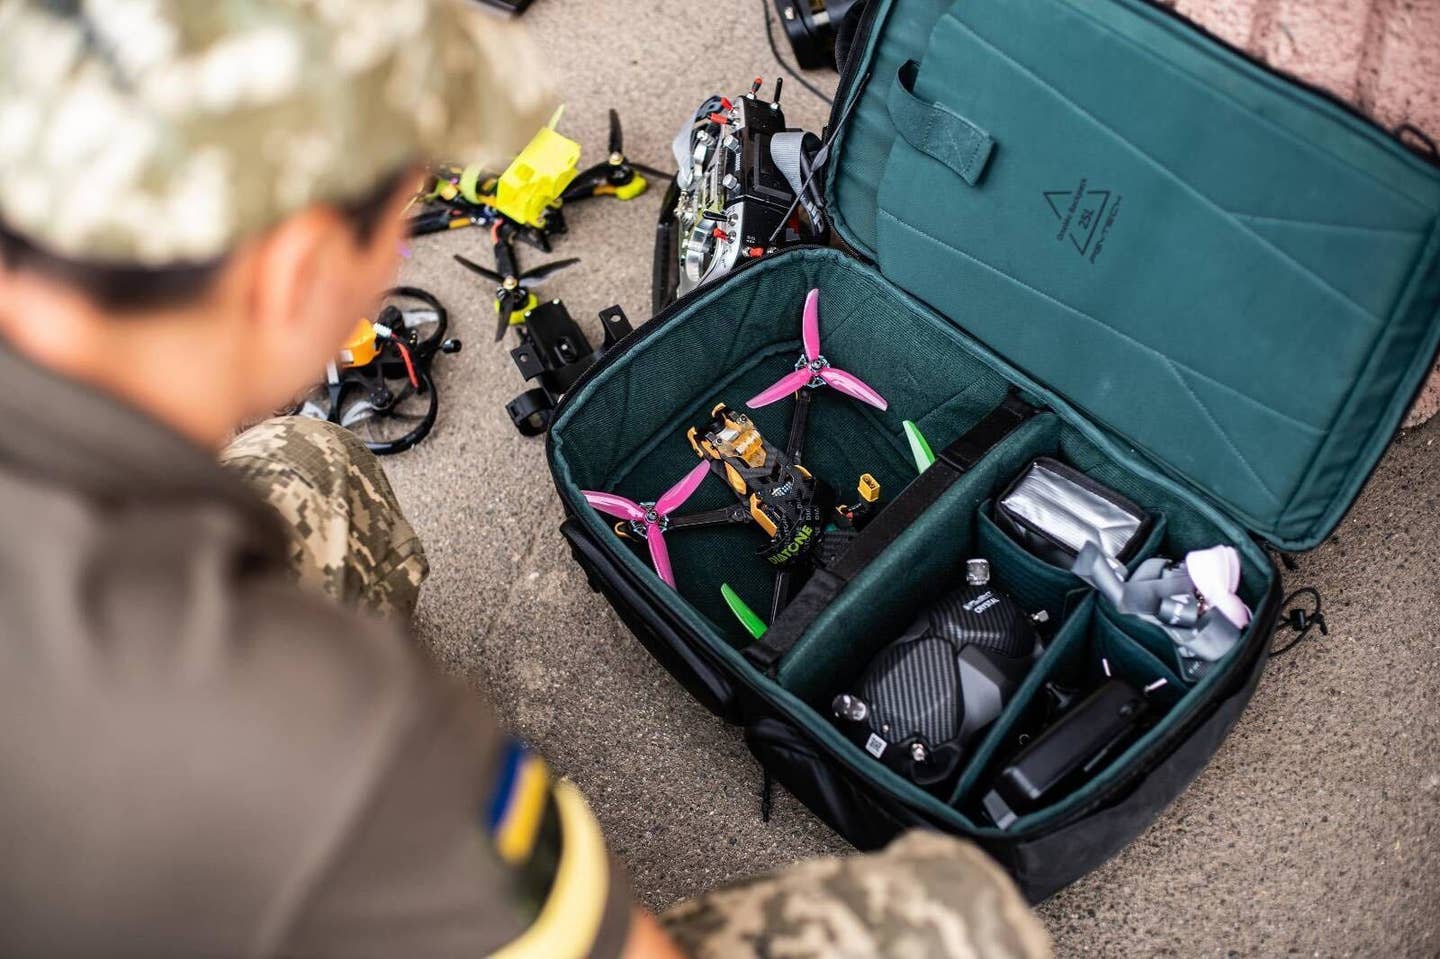 Just as in combat, drones are sometimes lost or damaged during training, so a constant supply is needed. (Free Air school photo)